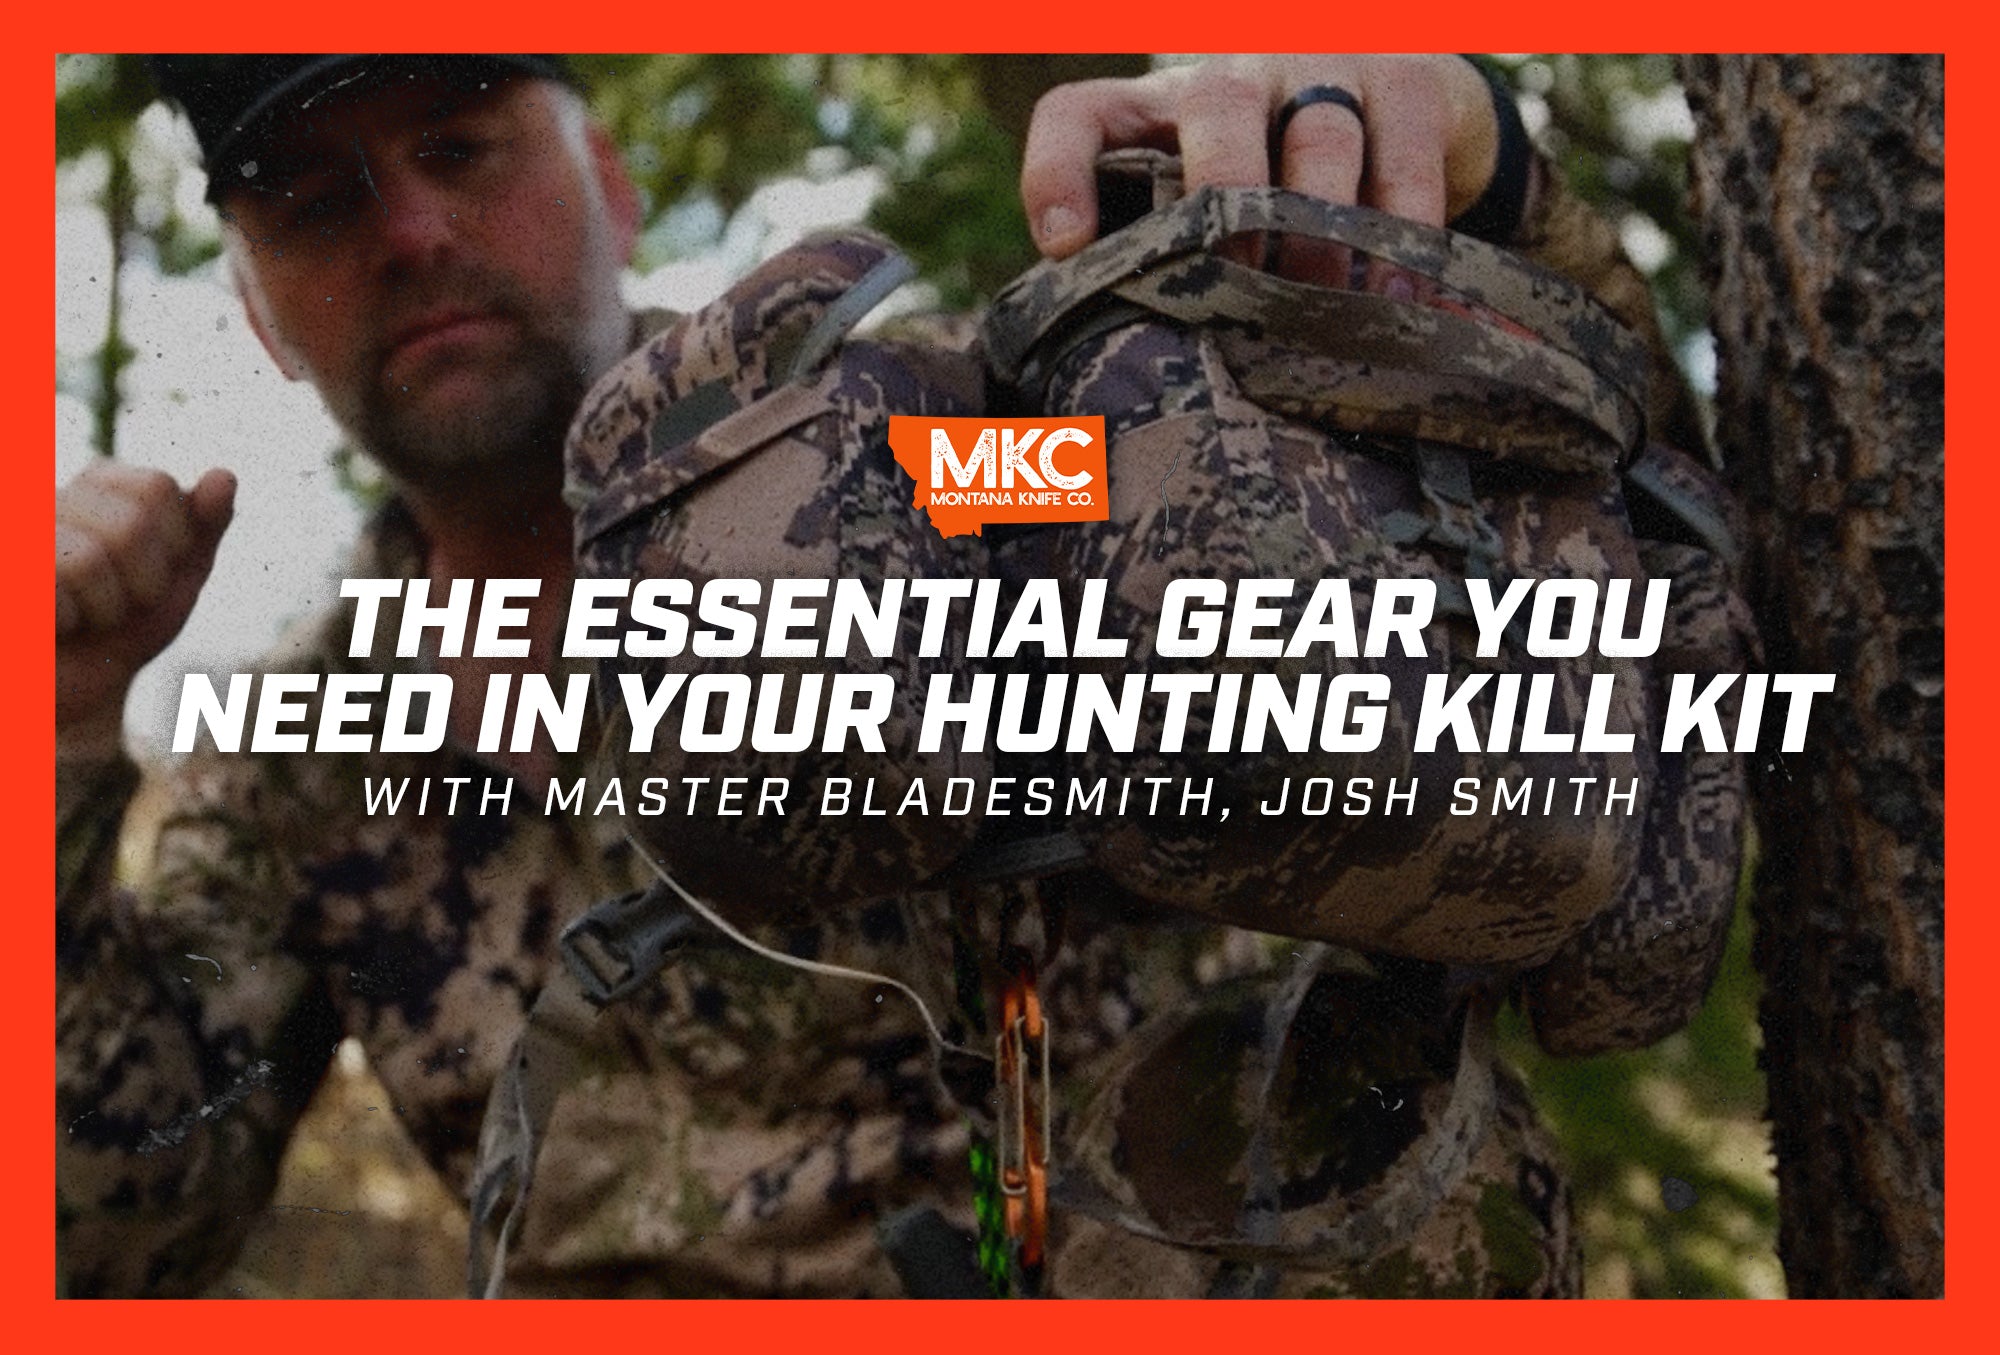 Master bladesmith Josh Smith holds up his hunting kill kit while dressed in camo out in the field.